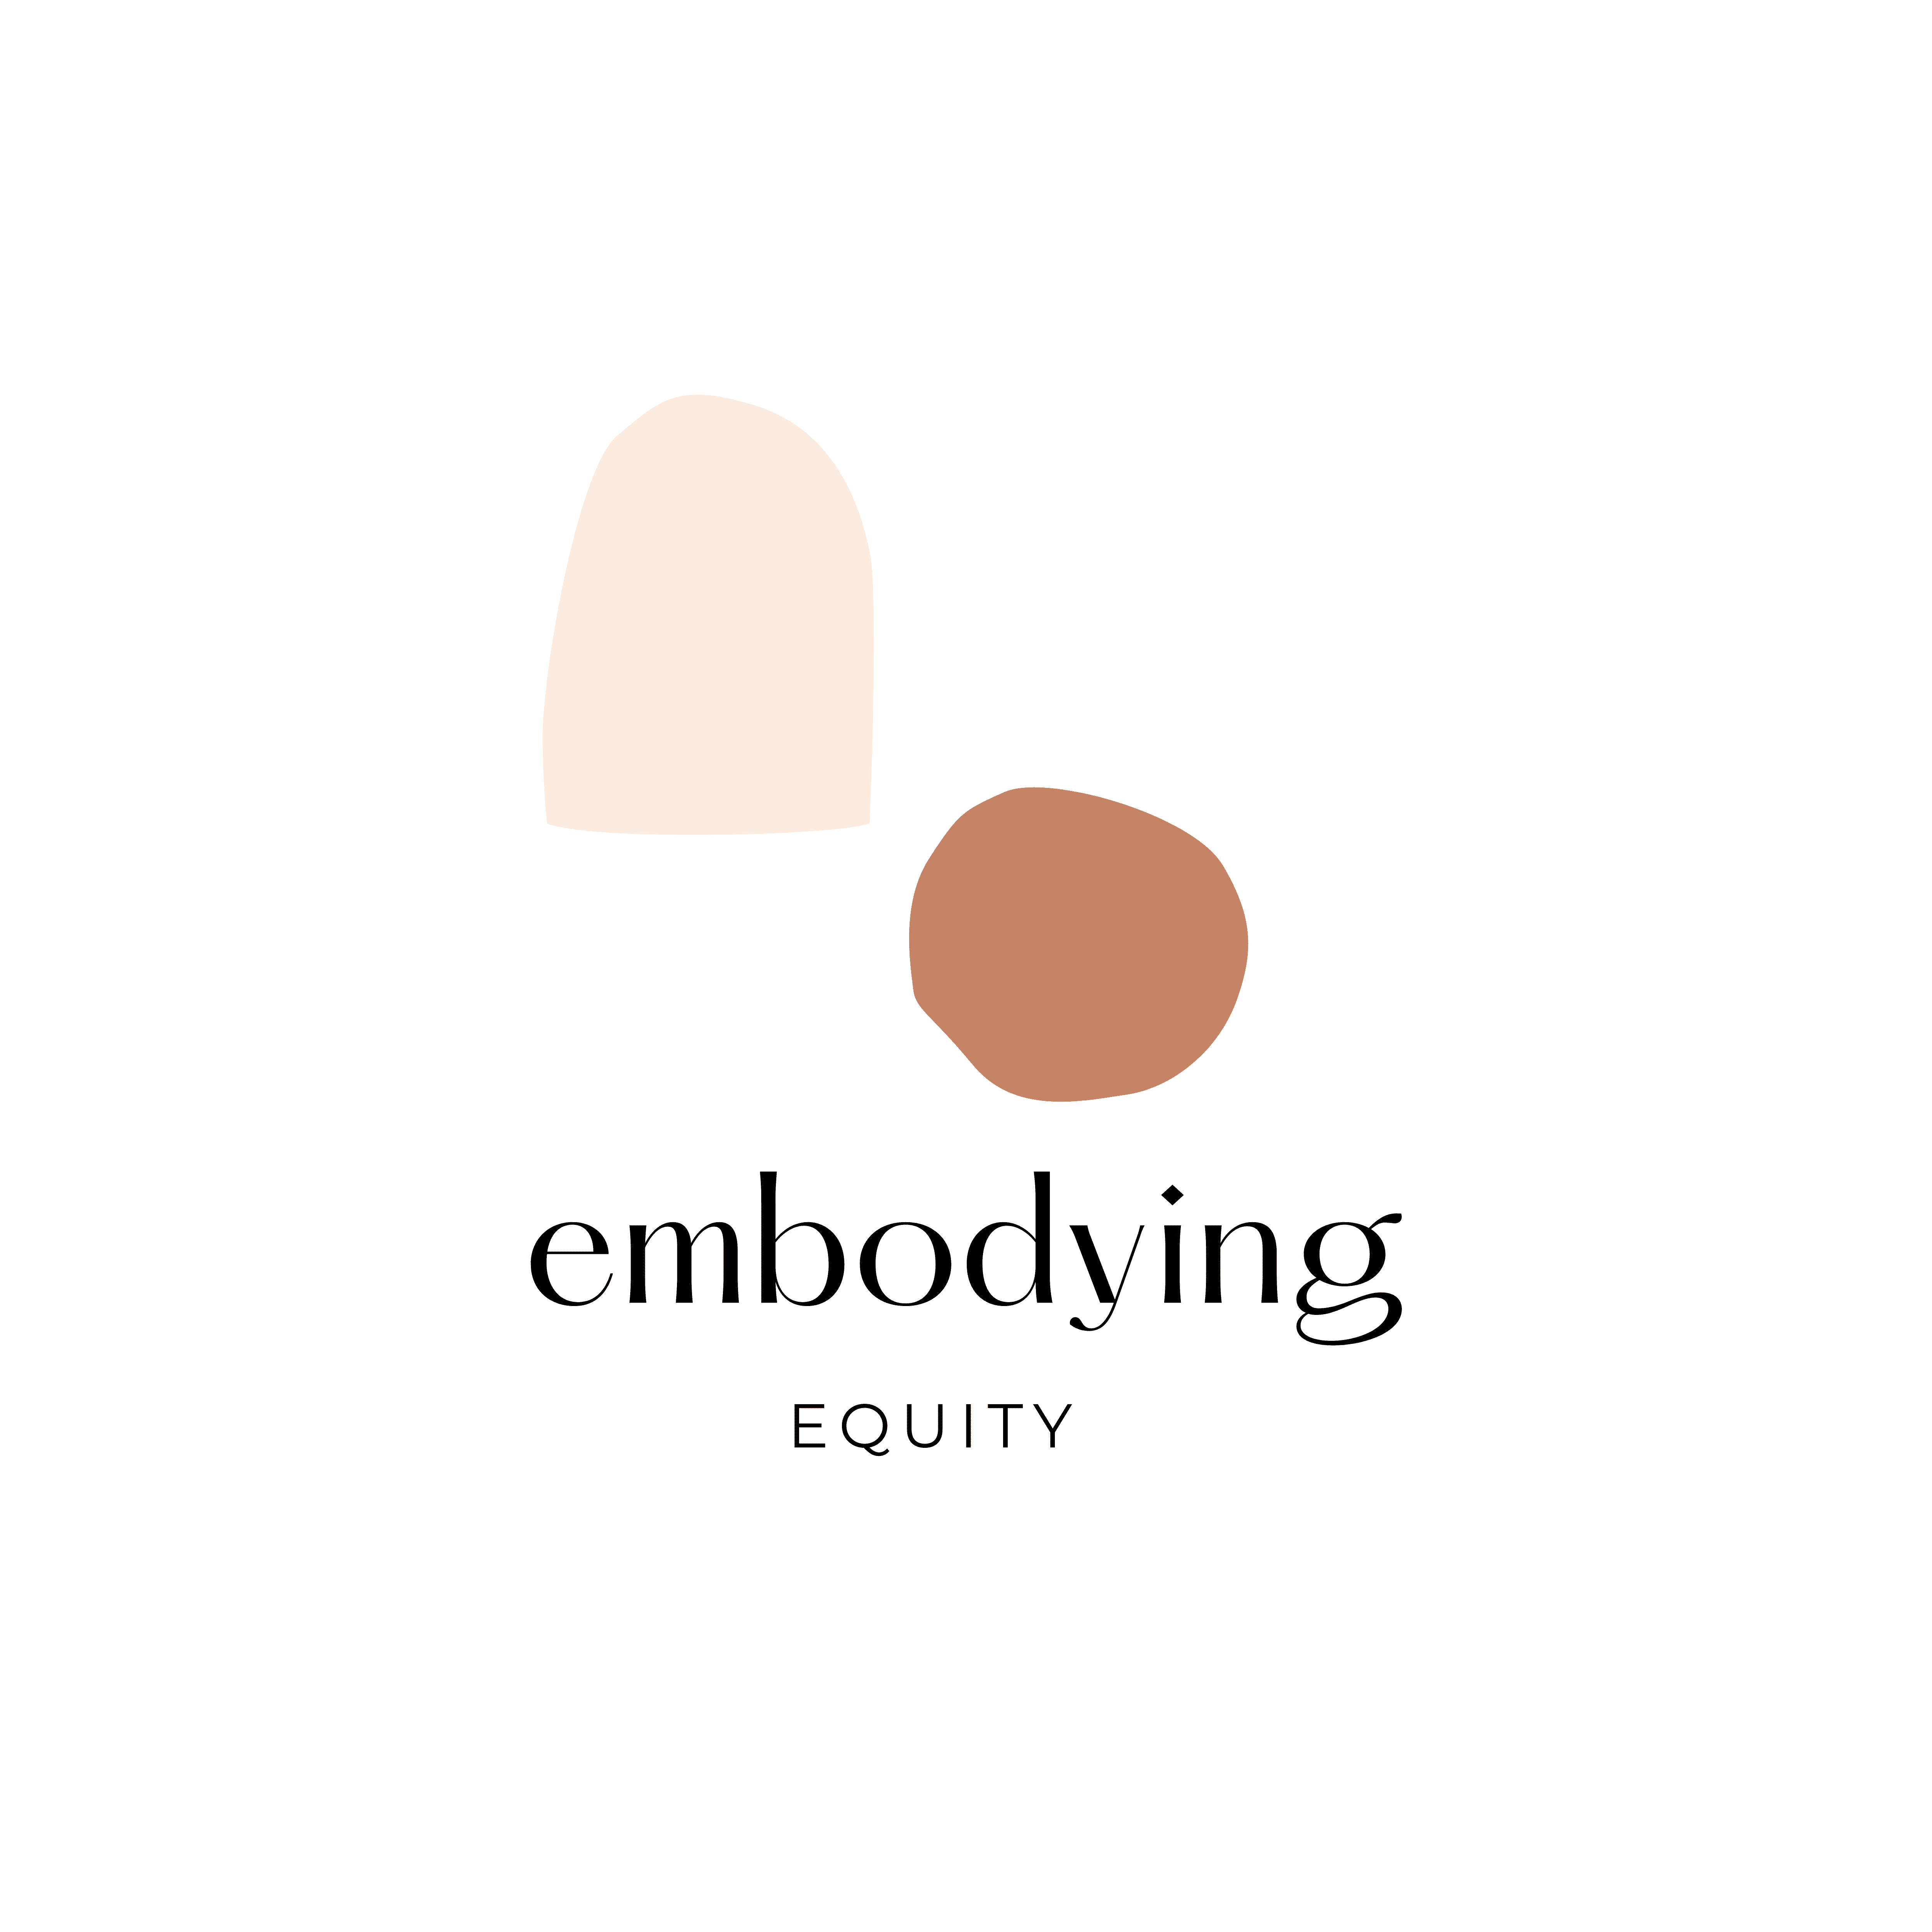 Light orange background with embodying equity logo consisting of a cream crescent shaped image and a burnt orange circle